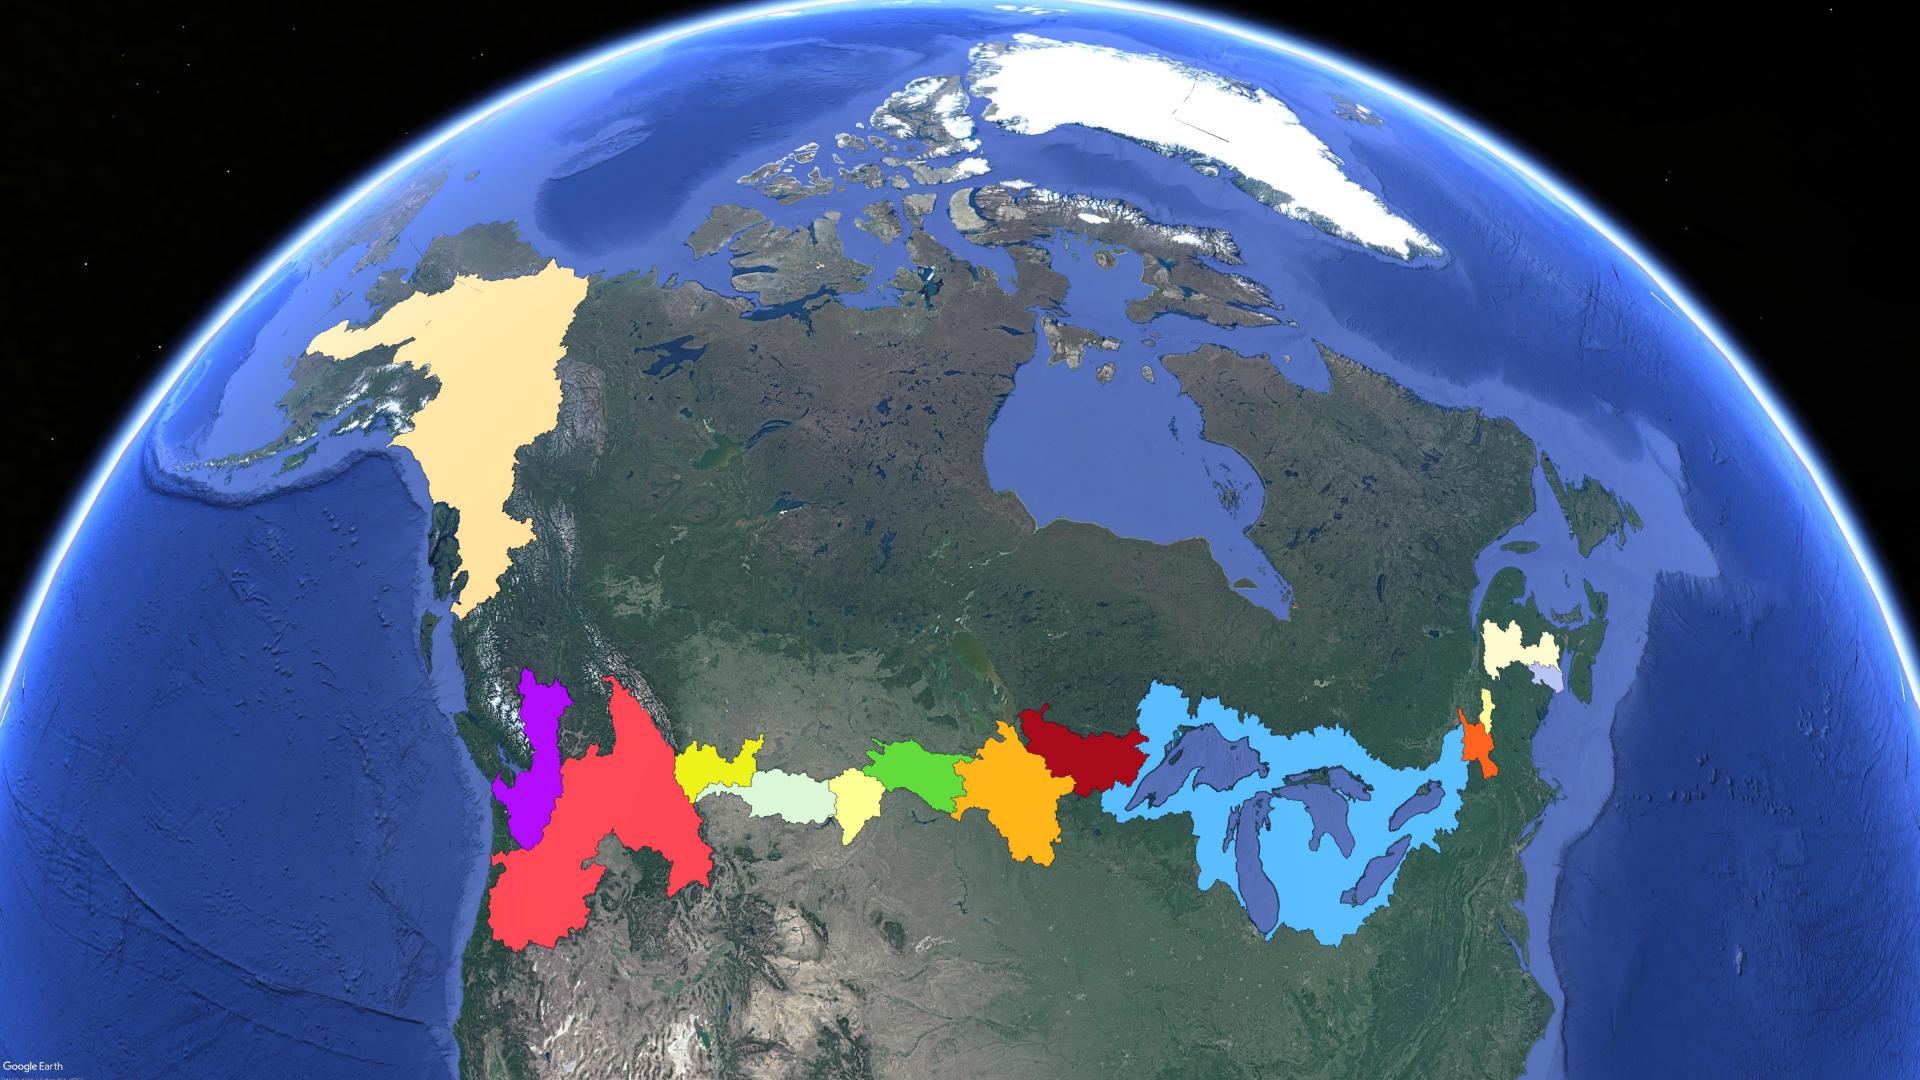 Water Matters - Watersheds across the transboundary region